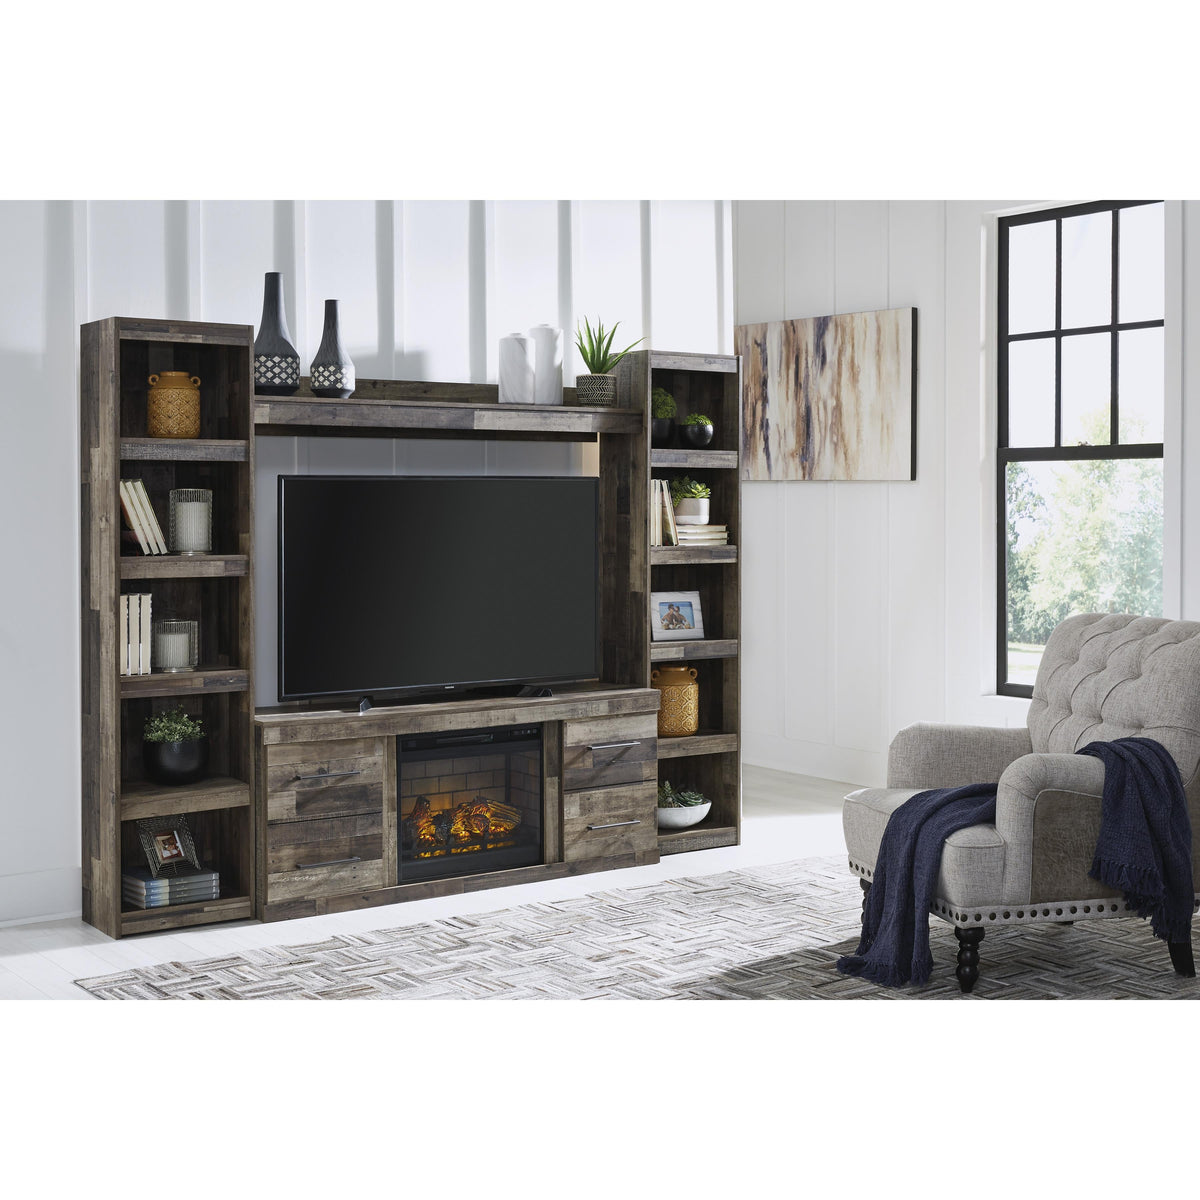 Signature Design by Ashley Derekson EW0200W8 4 pc Entertainment Center with Electric Fireplace